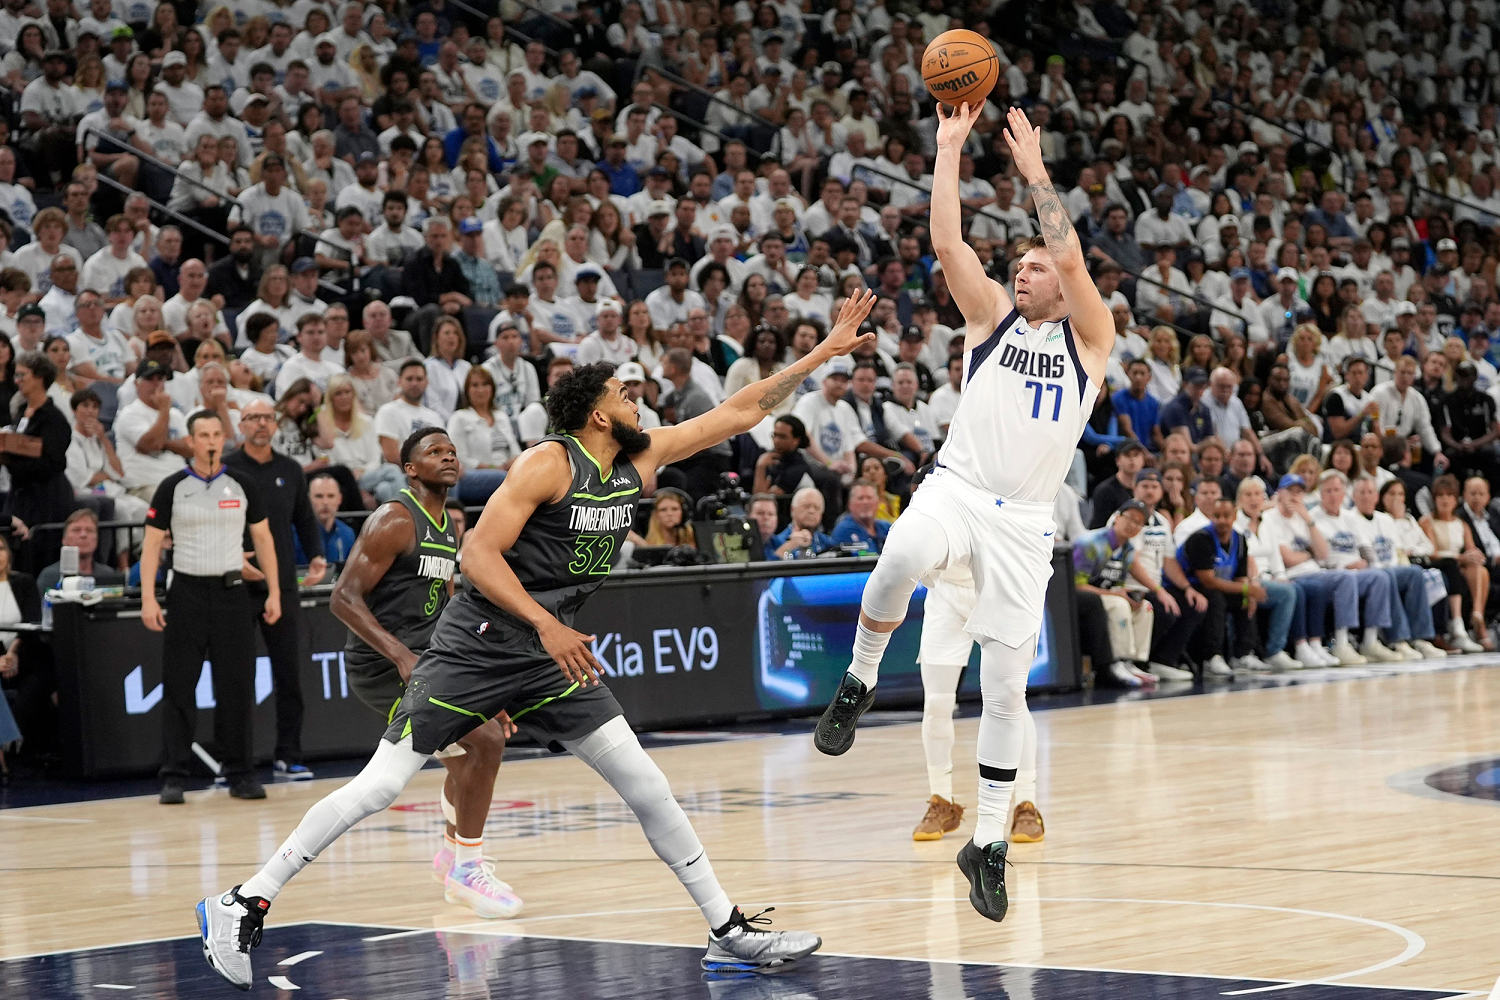 Doncic drops 36 points to push Mavericks to NBA Finals with 124-103 win over Timberwolves